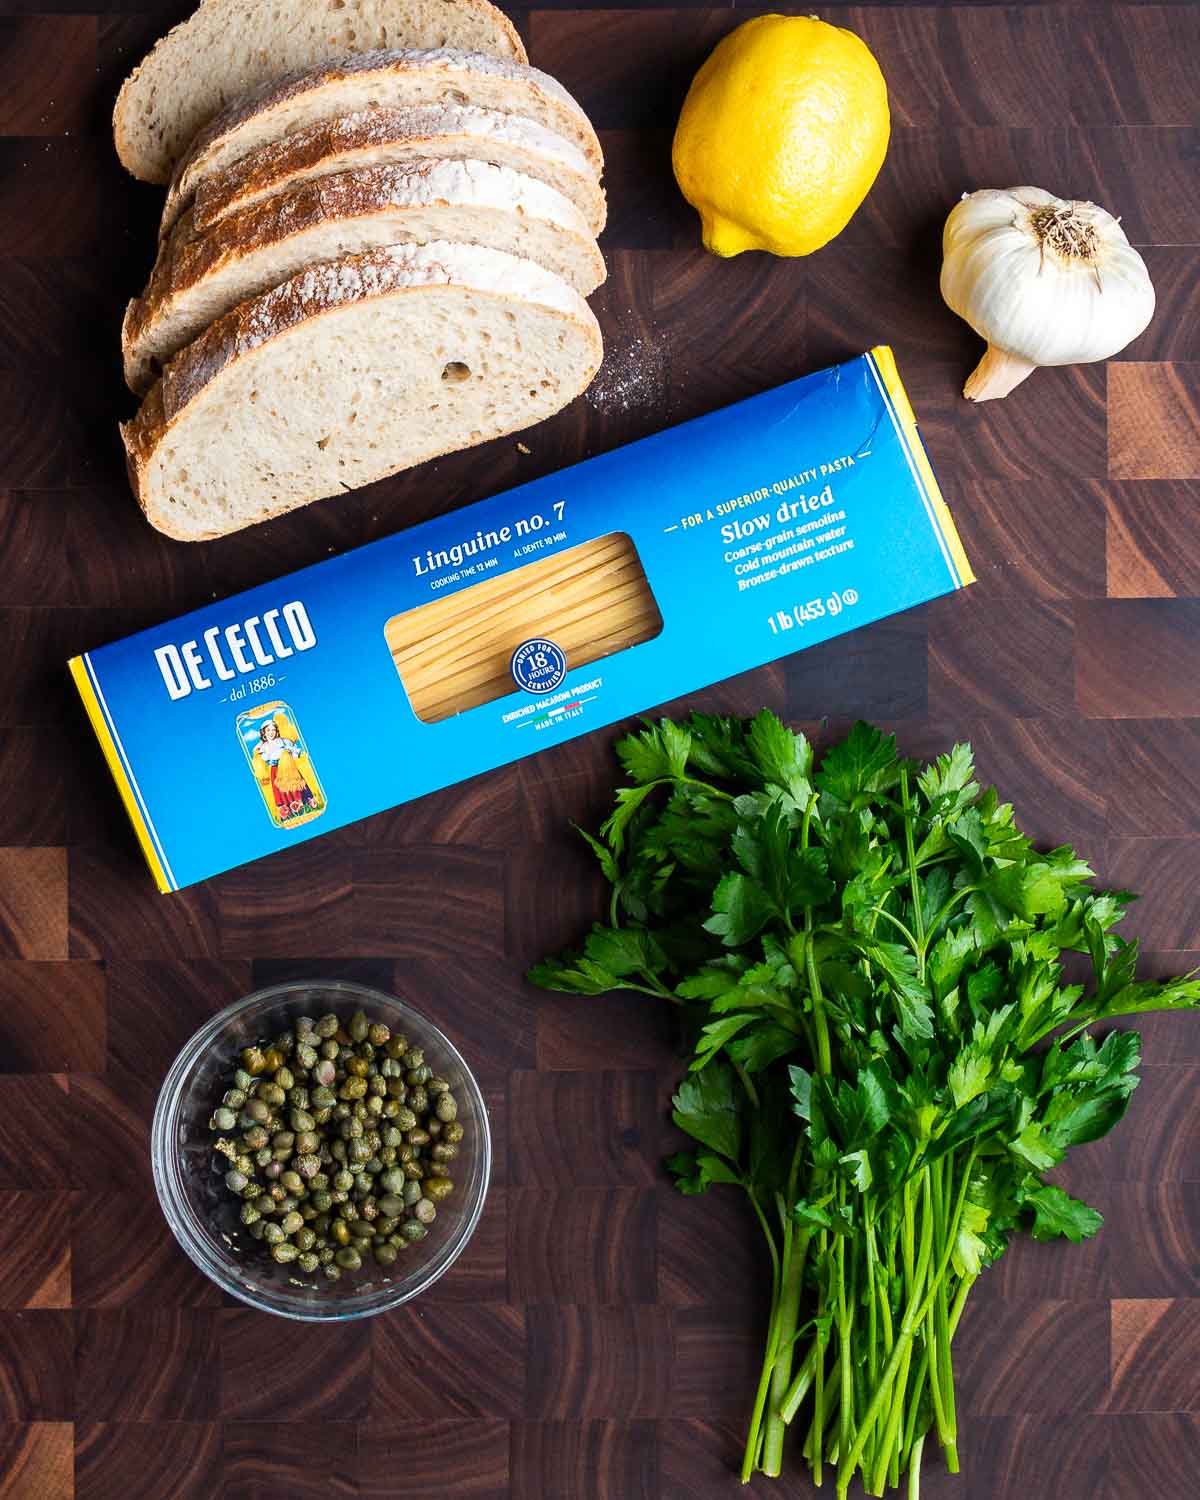 Ingredients shown: bread, lemon, garlic, linguine, capers, and parsley.